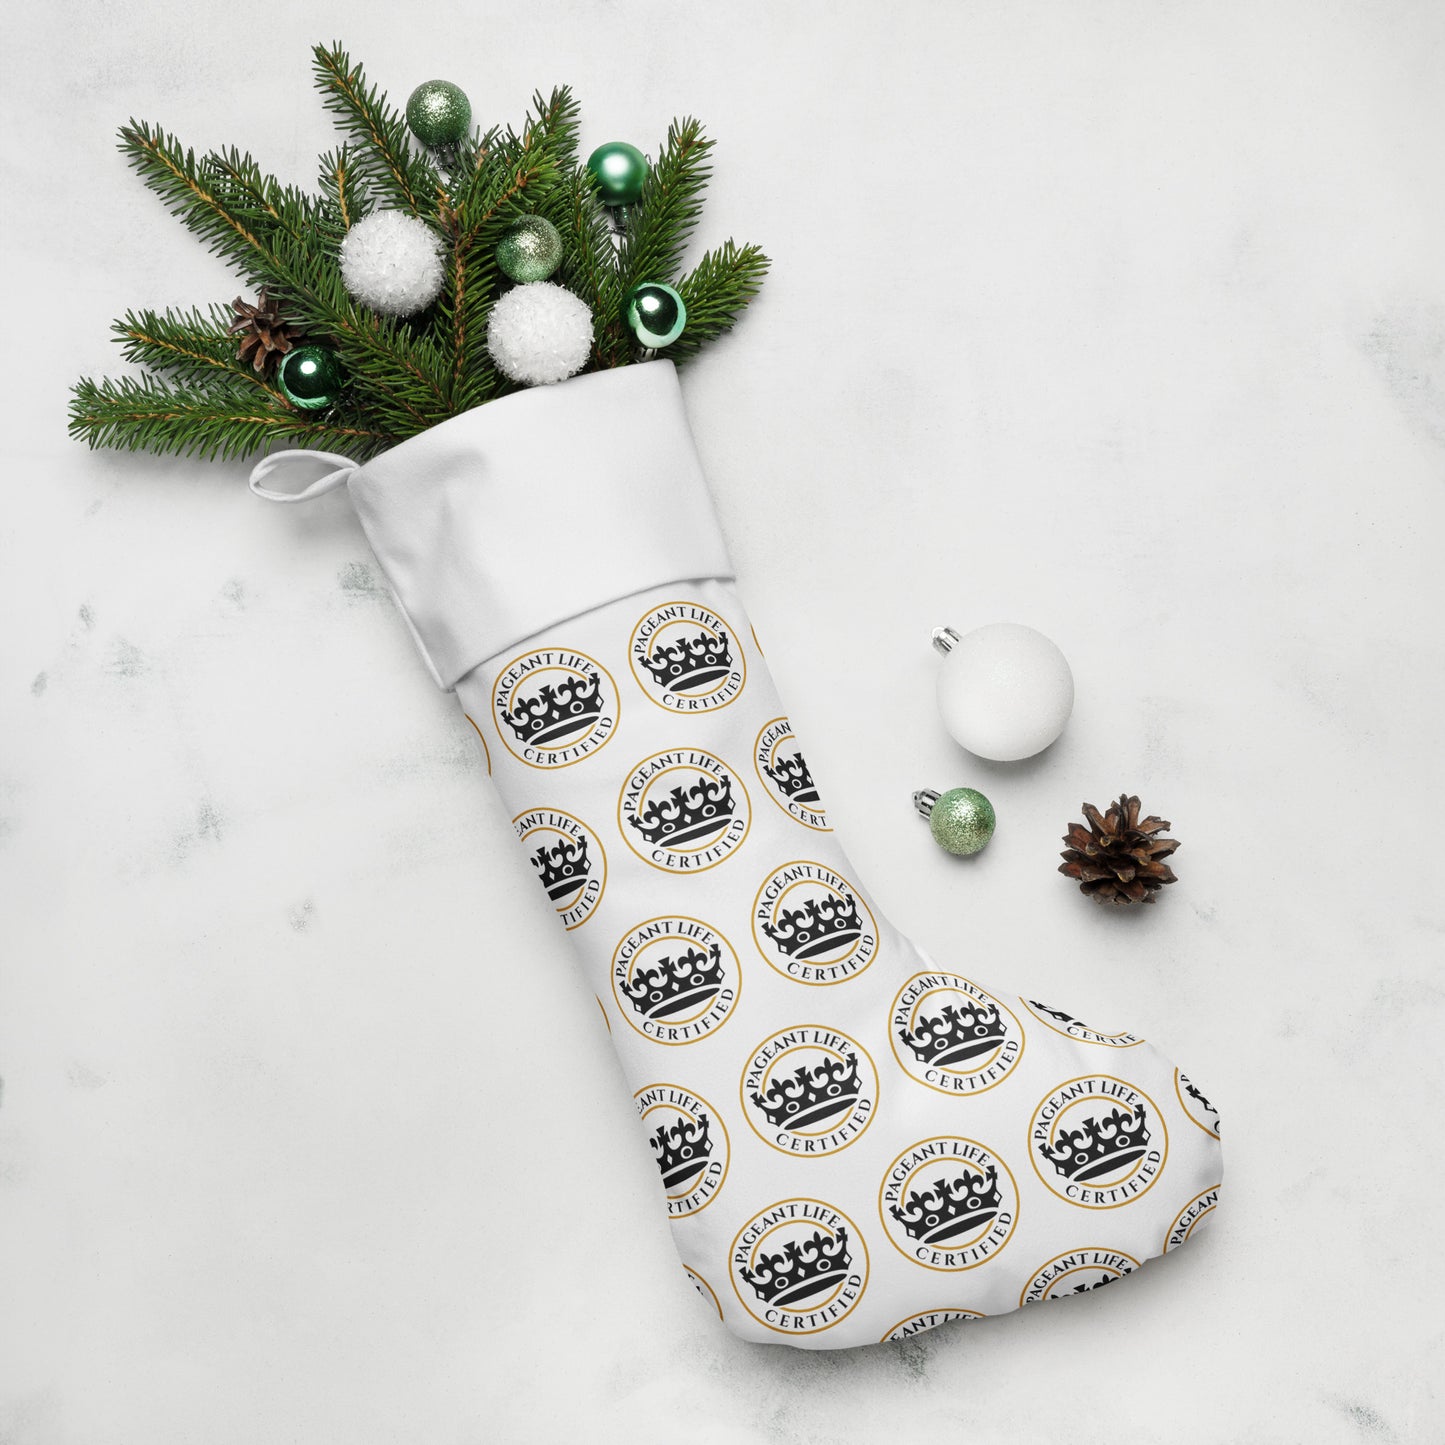 Black Gold and White Pageant Life Certified Christmas stocking